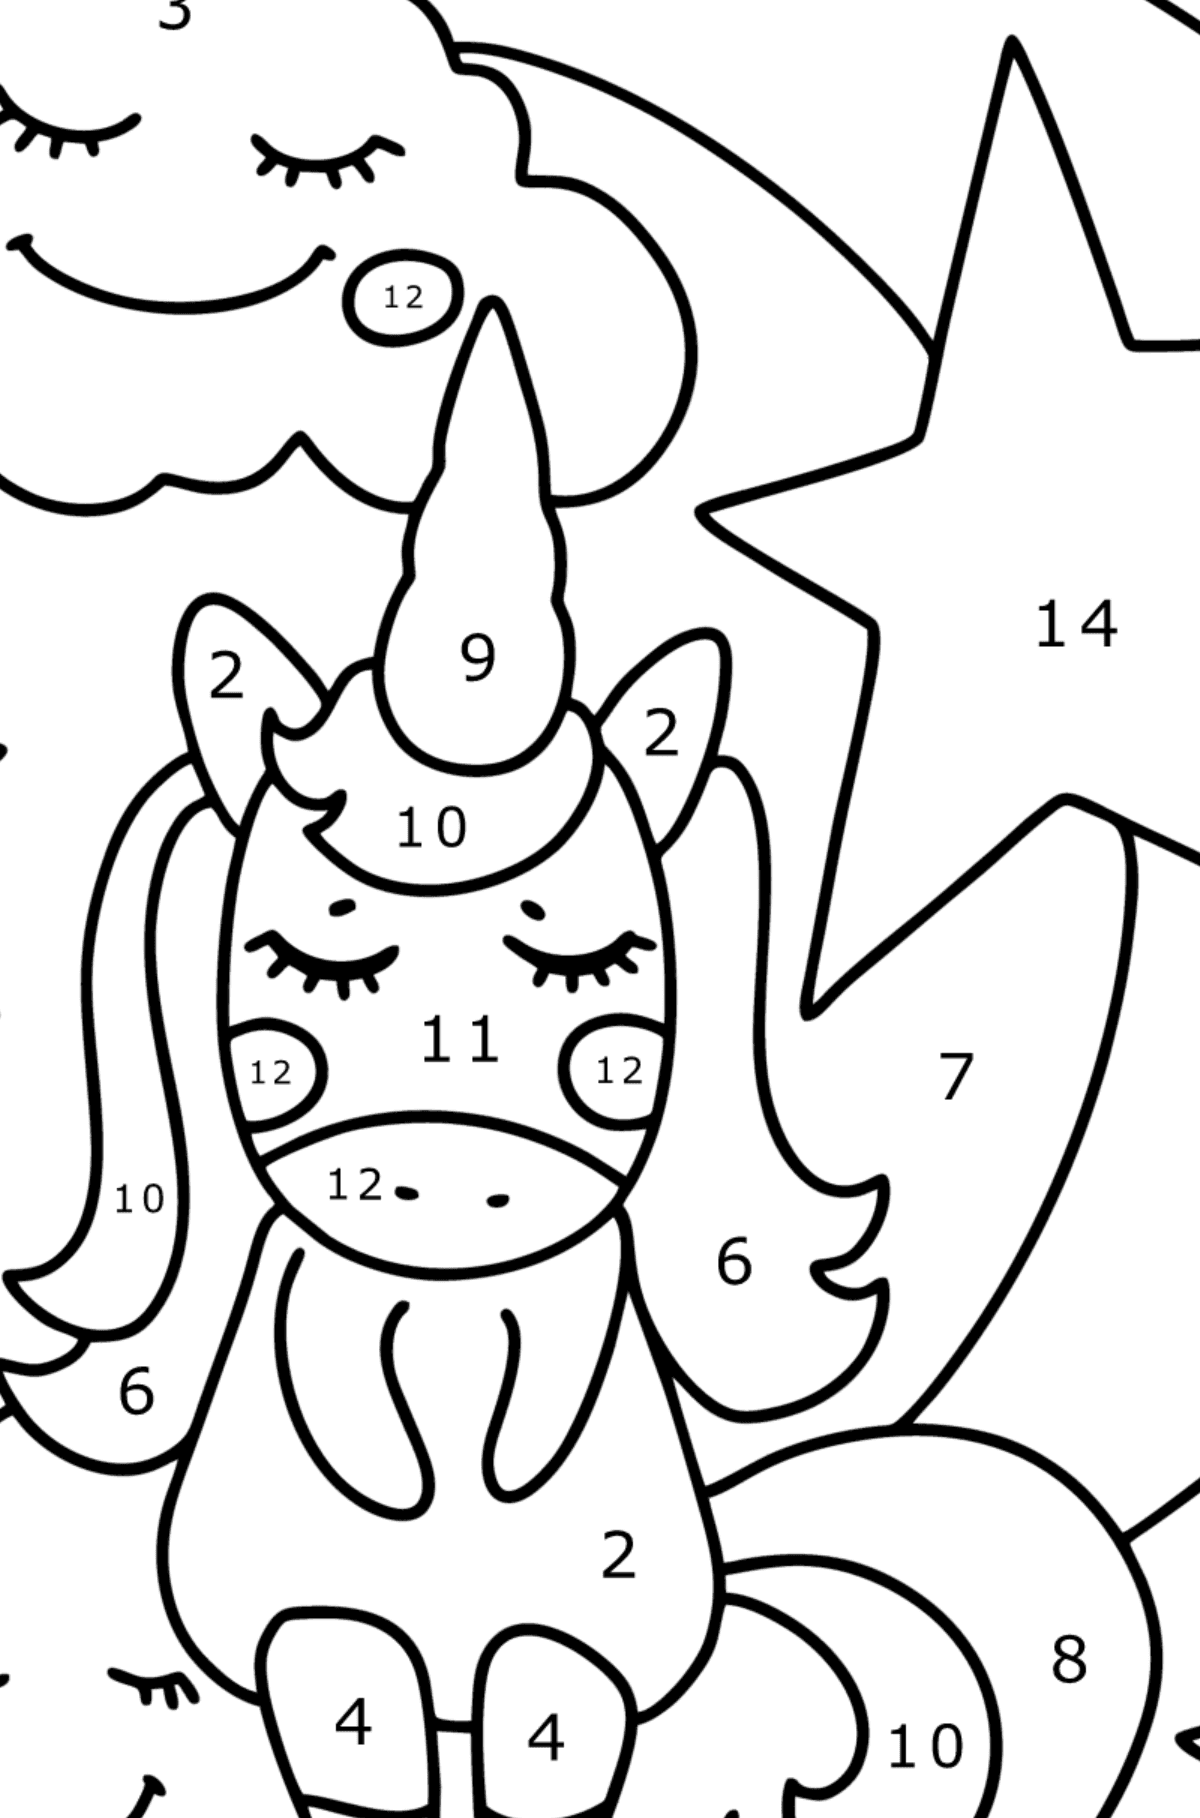 Star unicorn coloring page - Coloring by Numbers for Kids